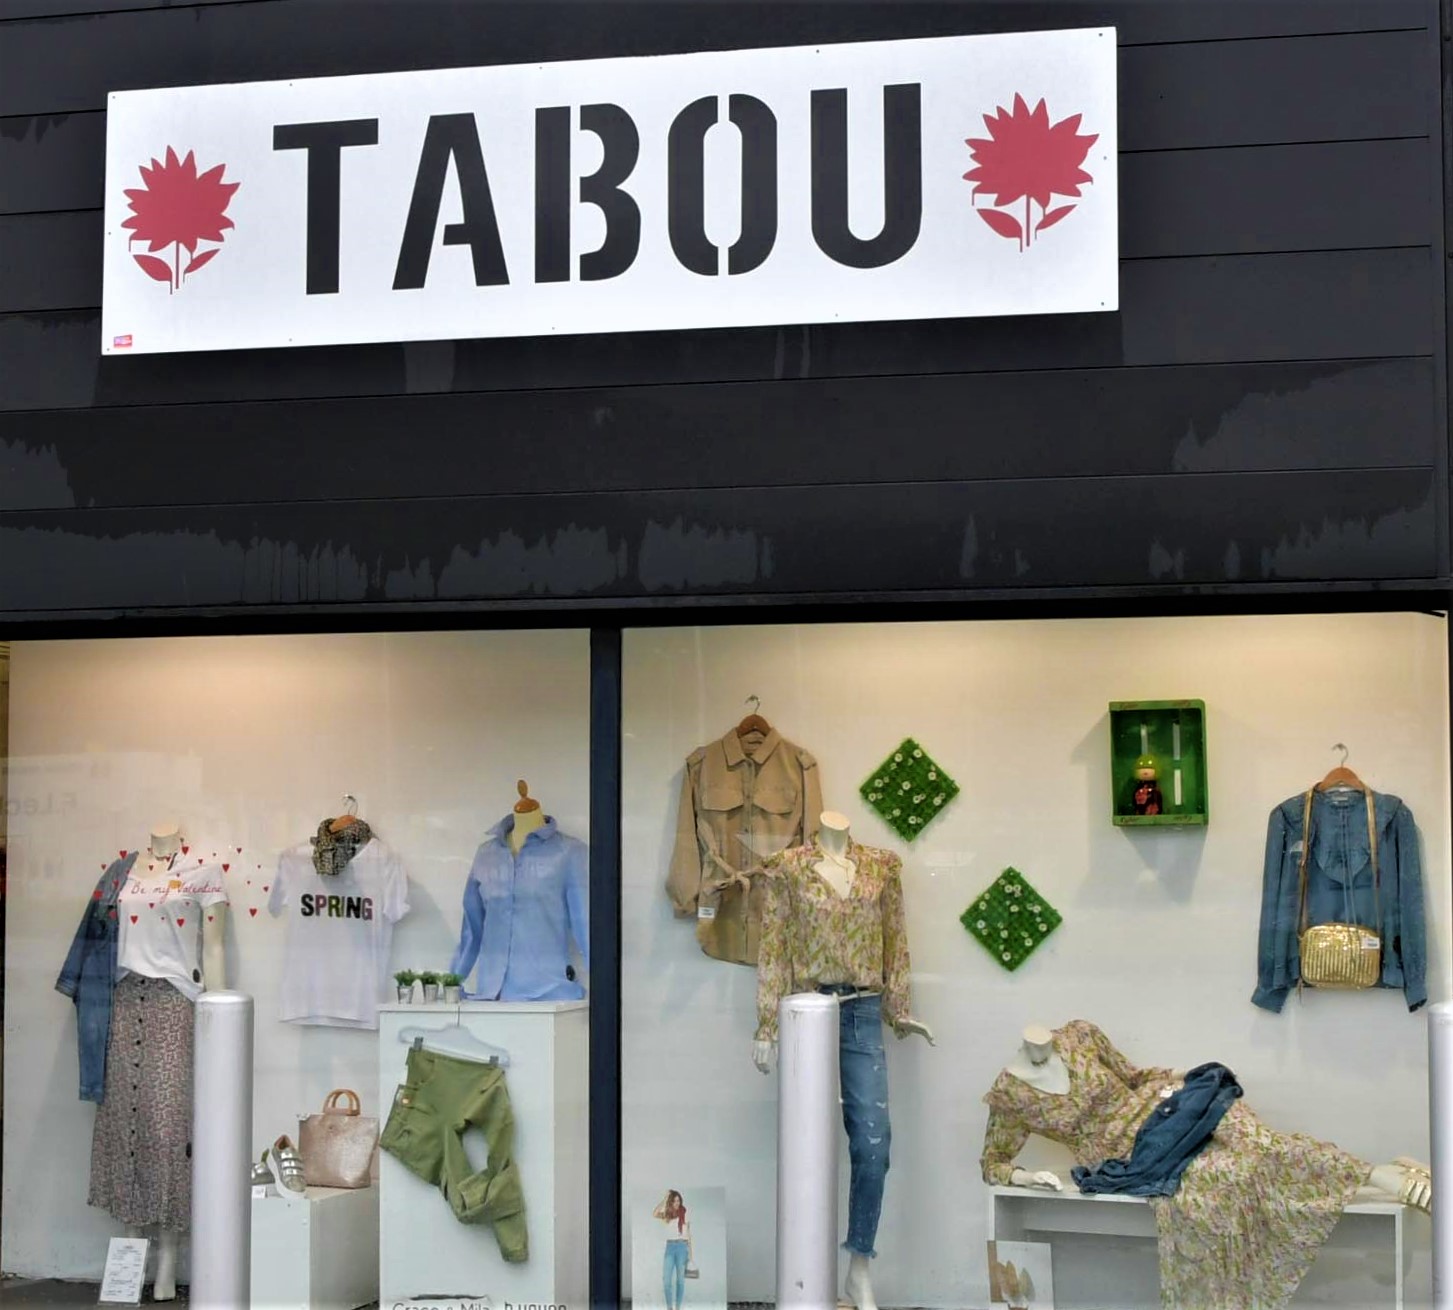 vitrine Tabou Limoux Taboustore